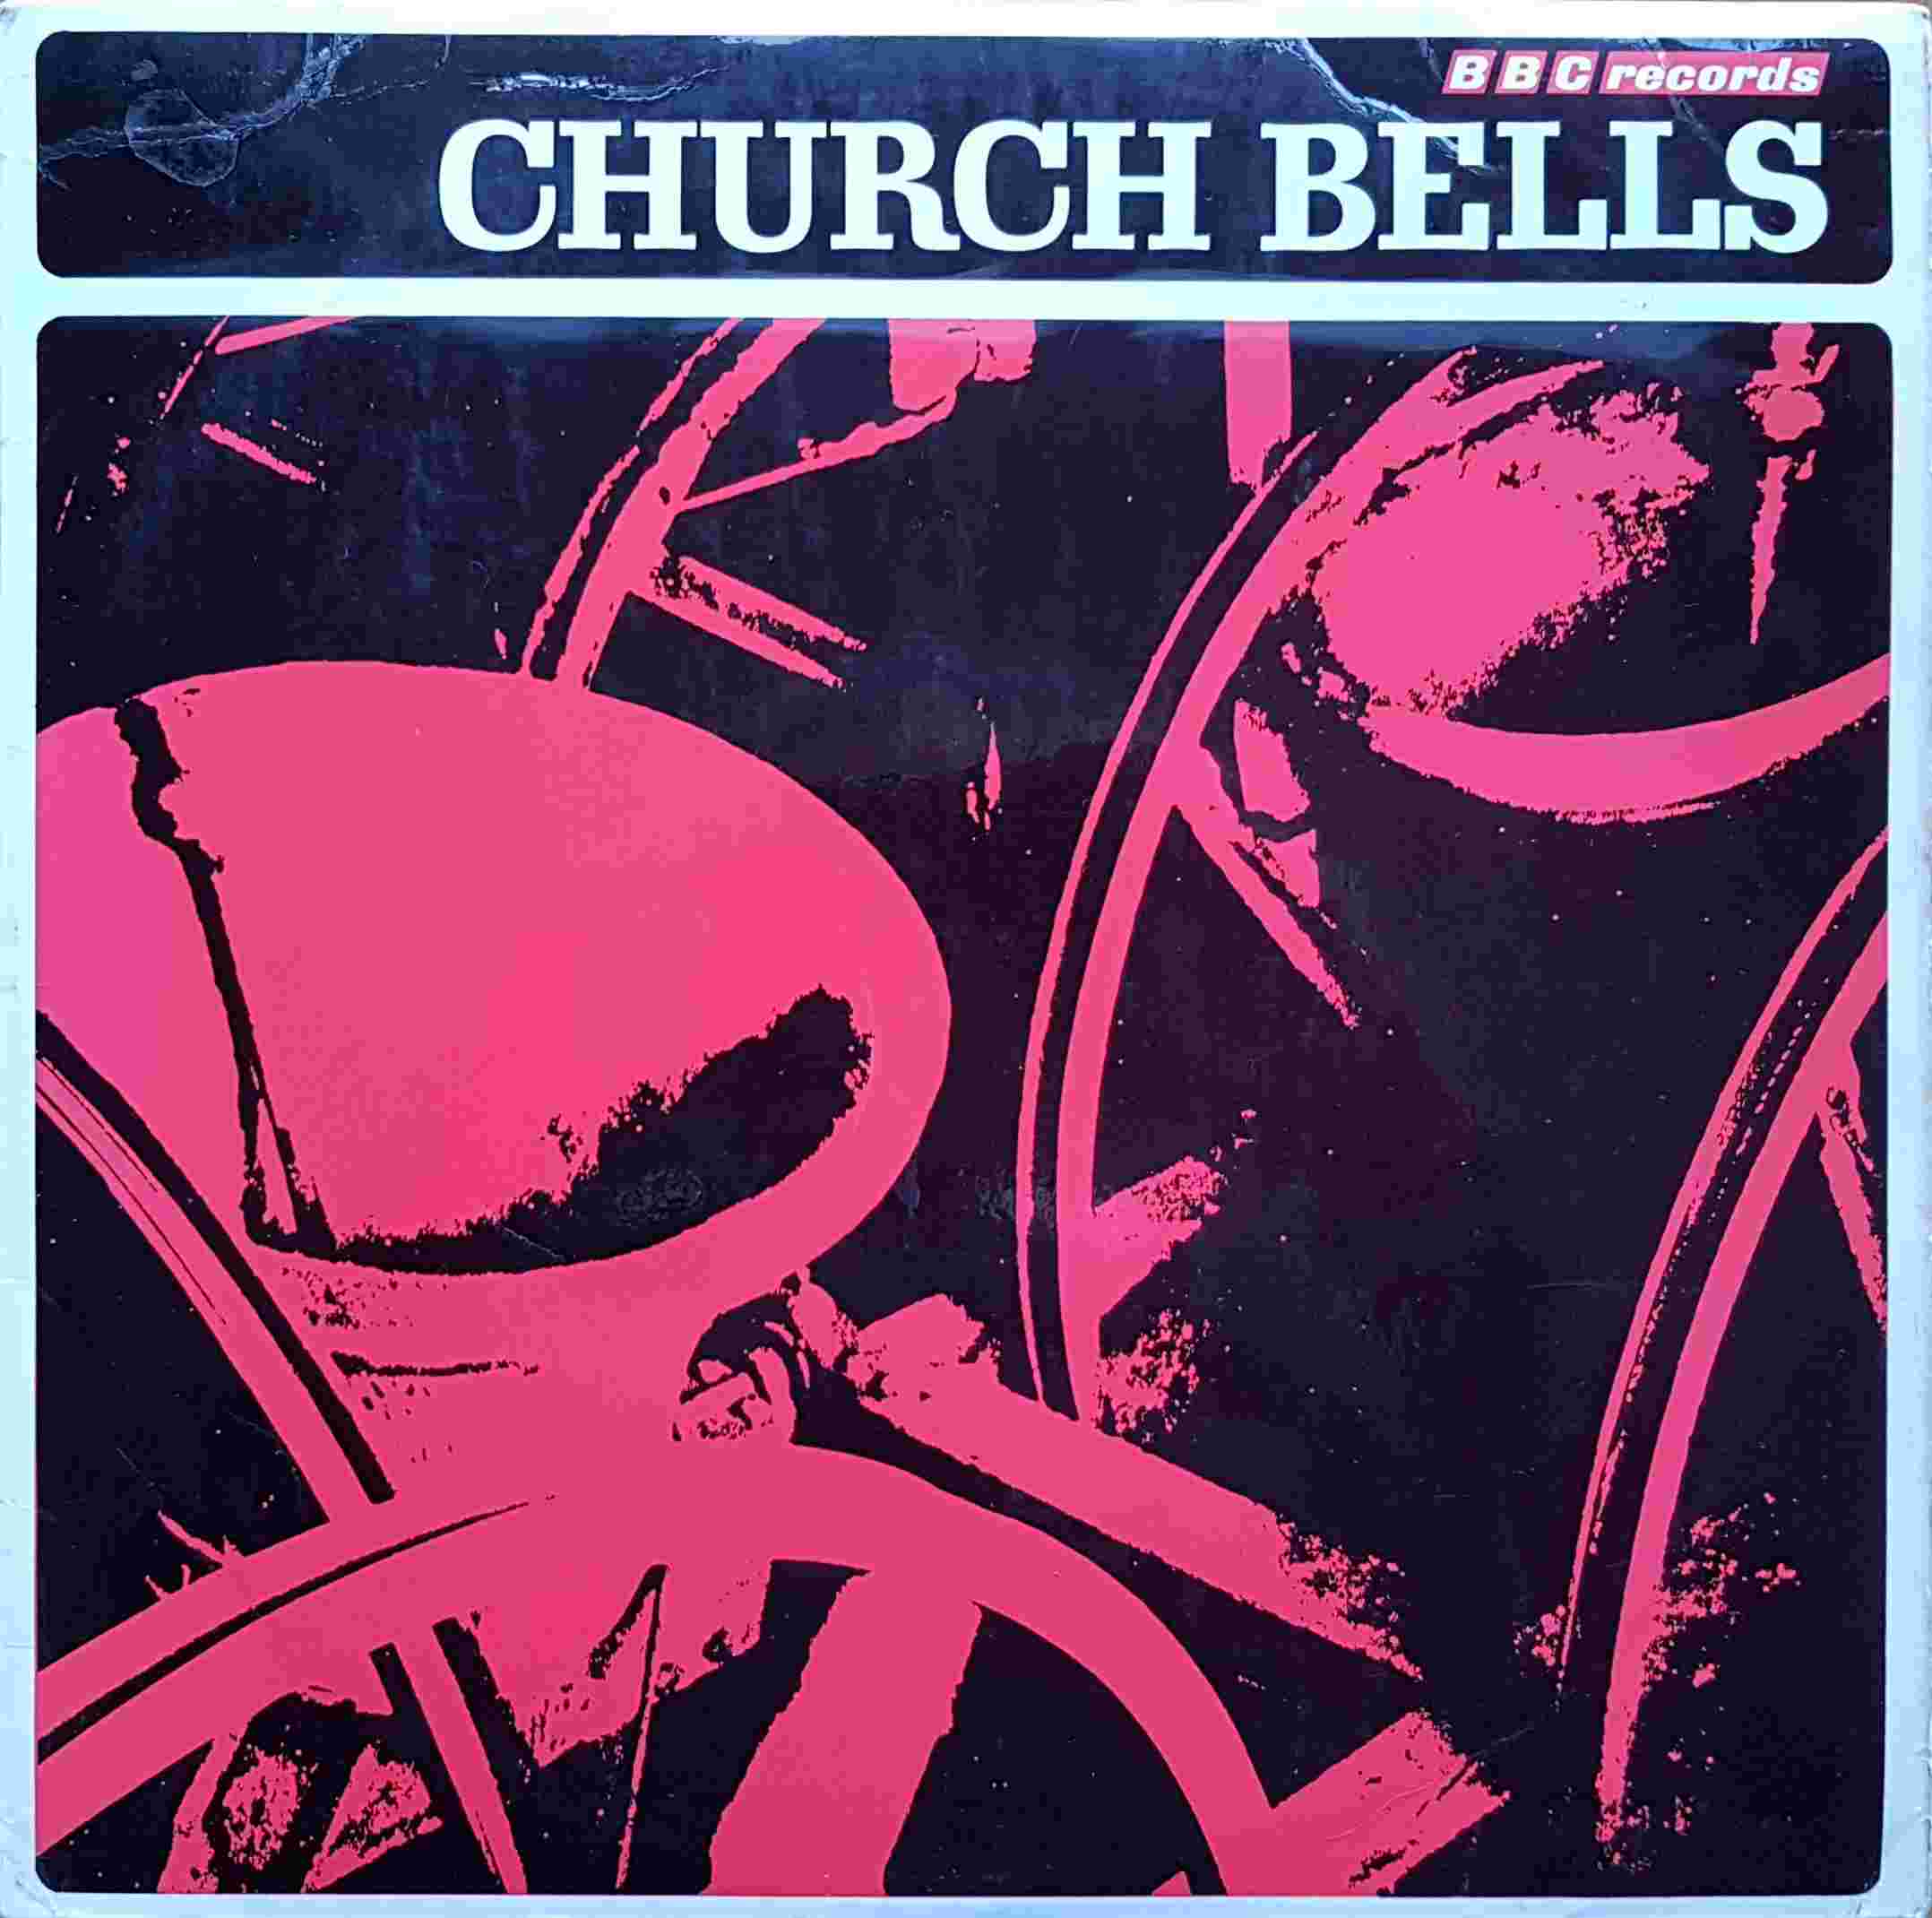 Picture of REC 77 Church bells by artist Various from the BBC albums - Records and Tapes library